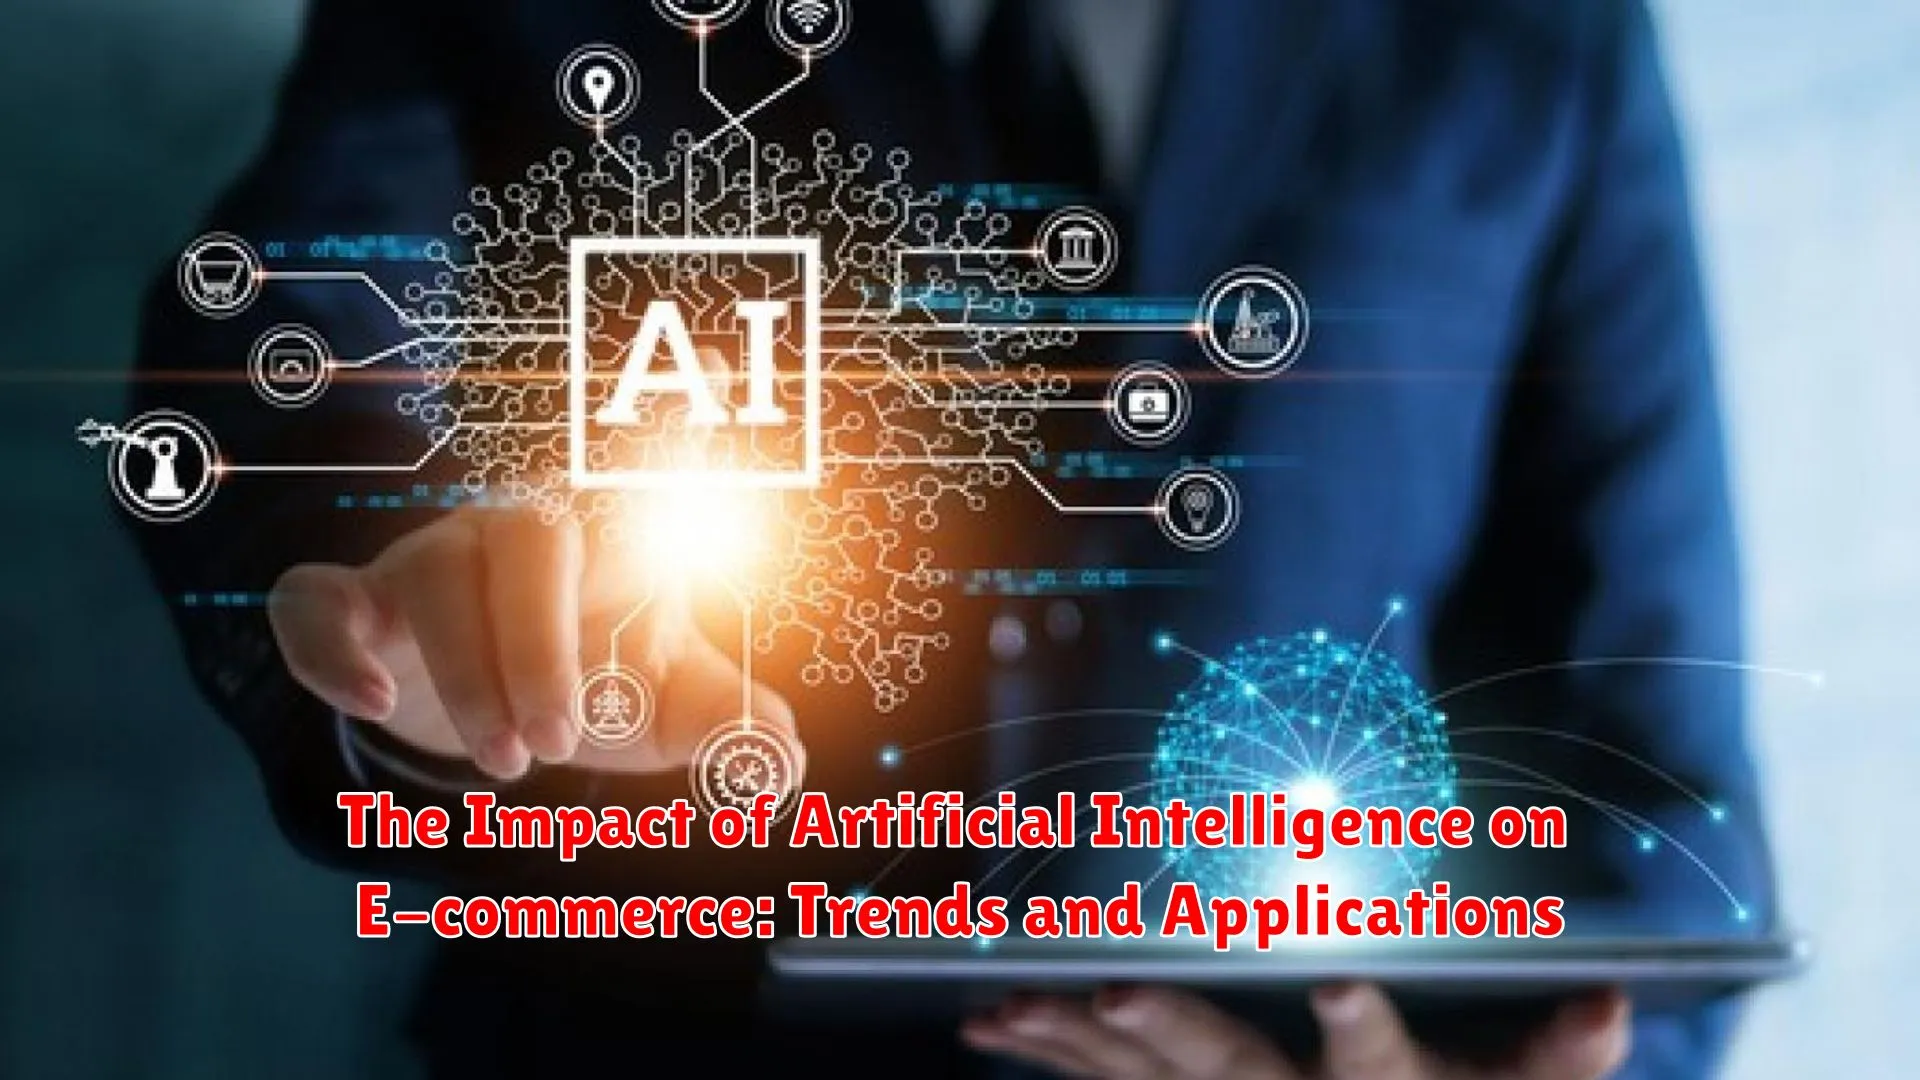 The Impact of Artificial Intelligence on E-commerce: Trends and Applications